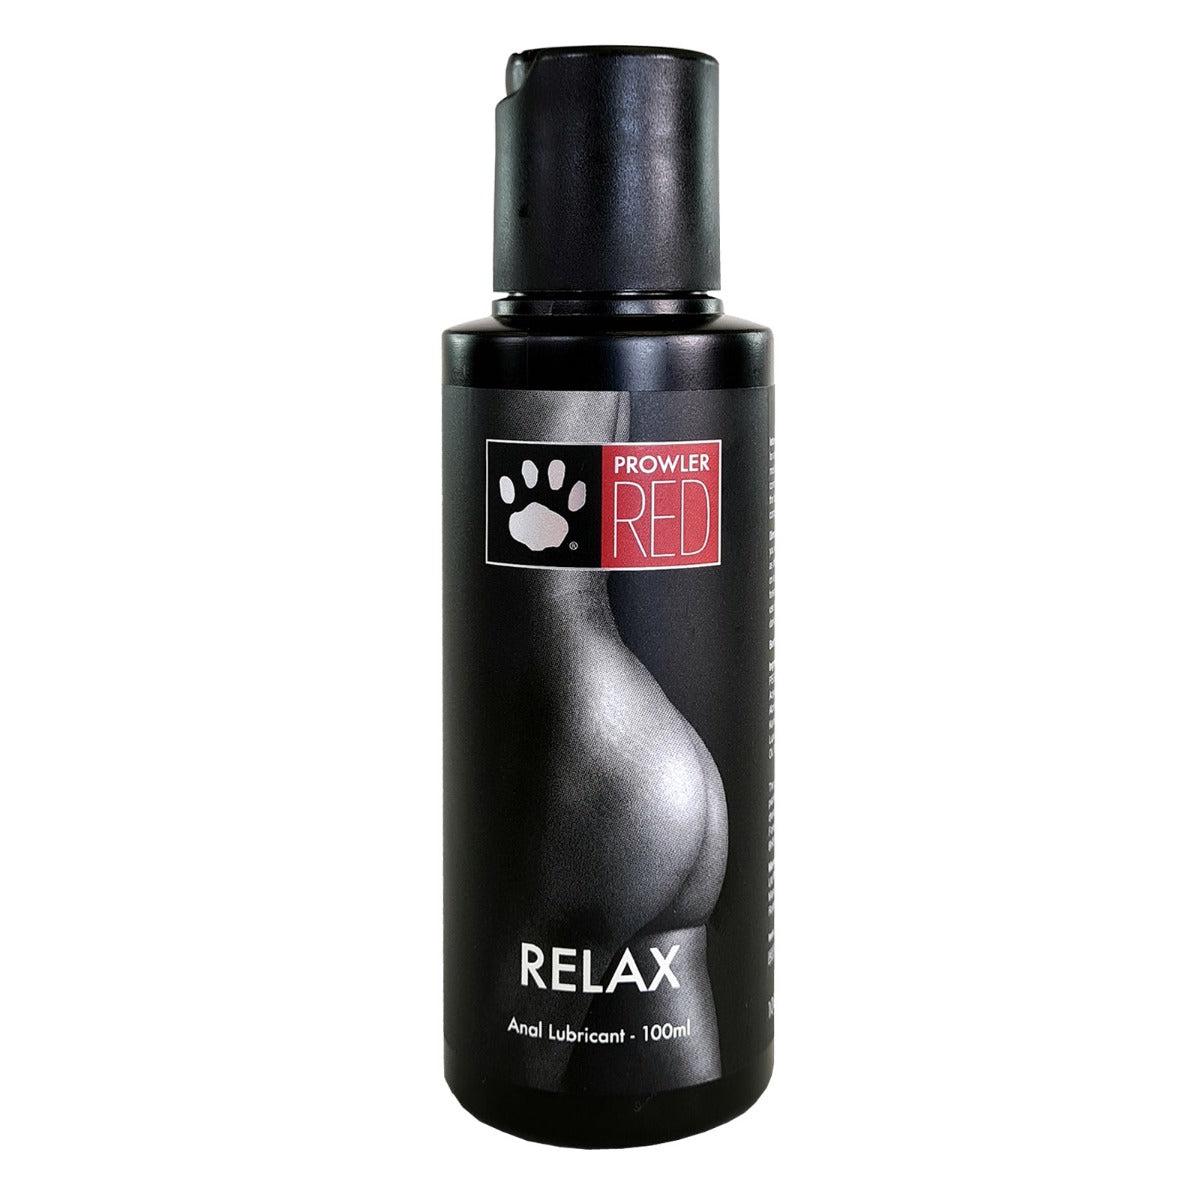 Water Based Lube Prowler RED Relax Anal Lube 100ml   